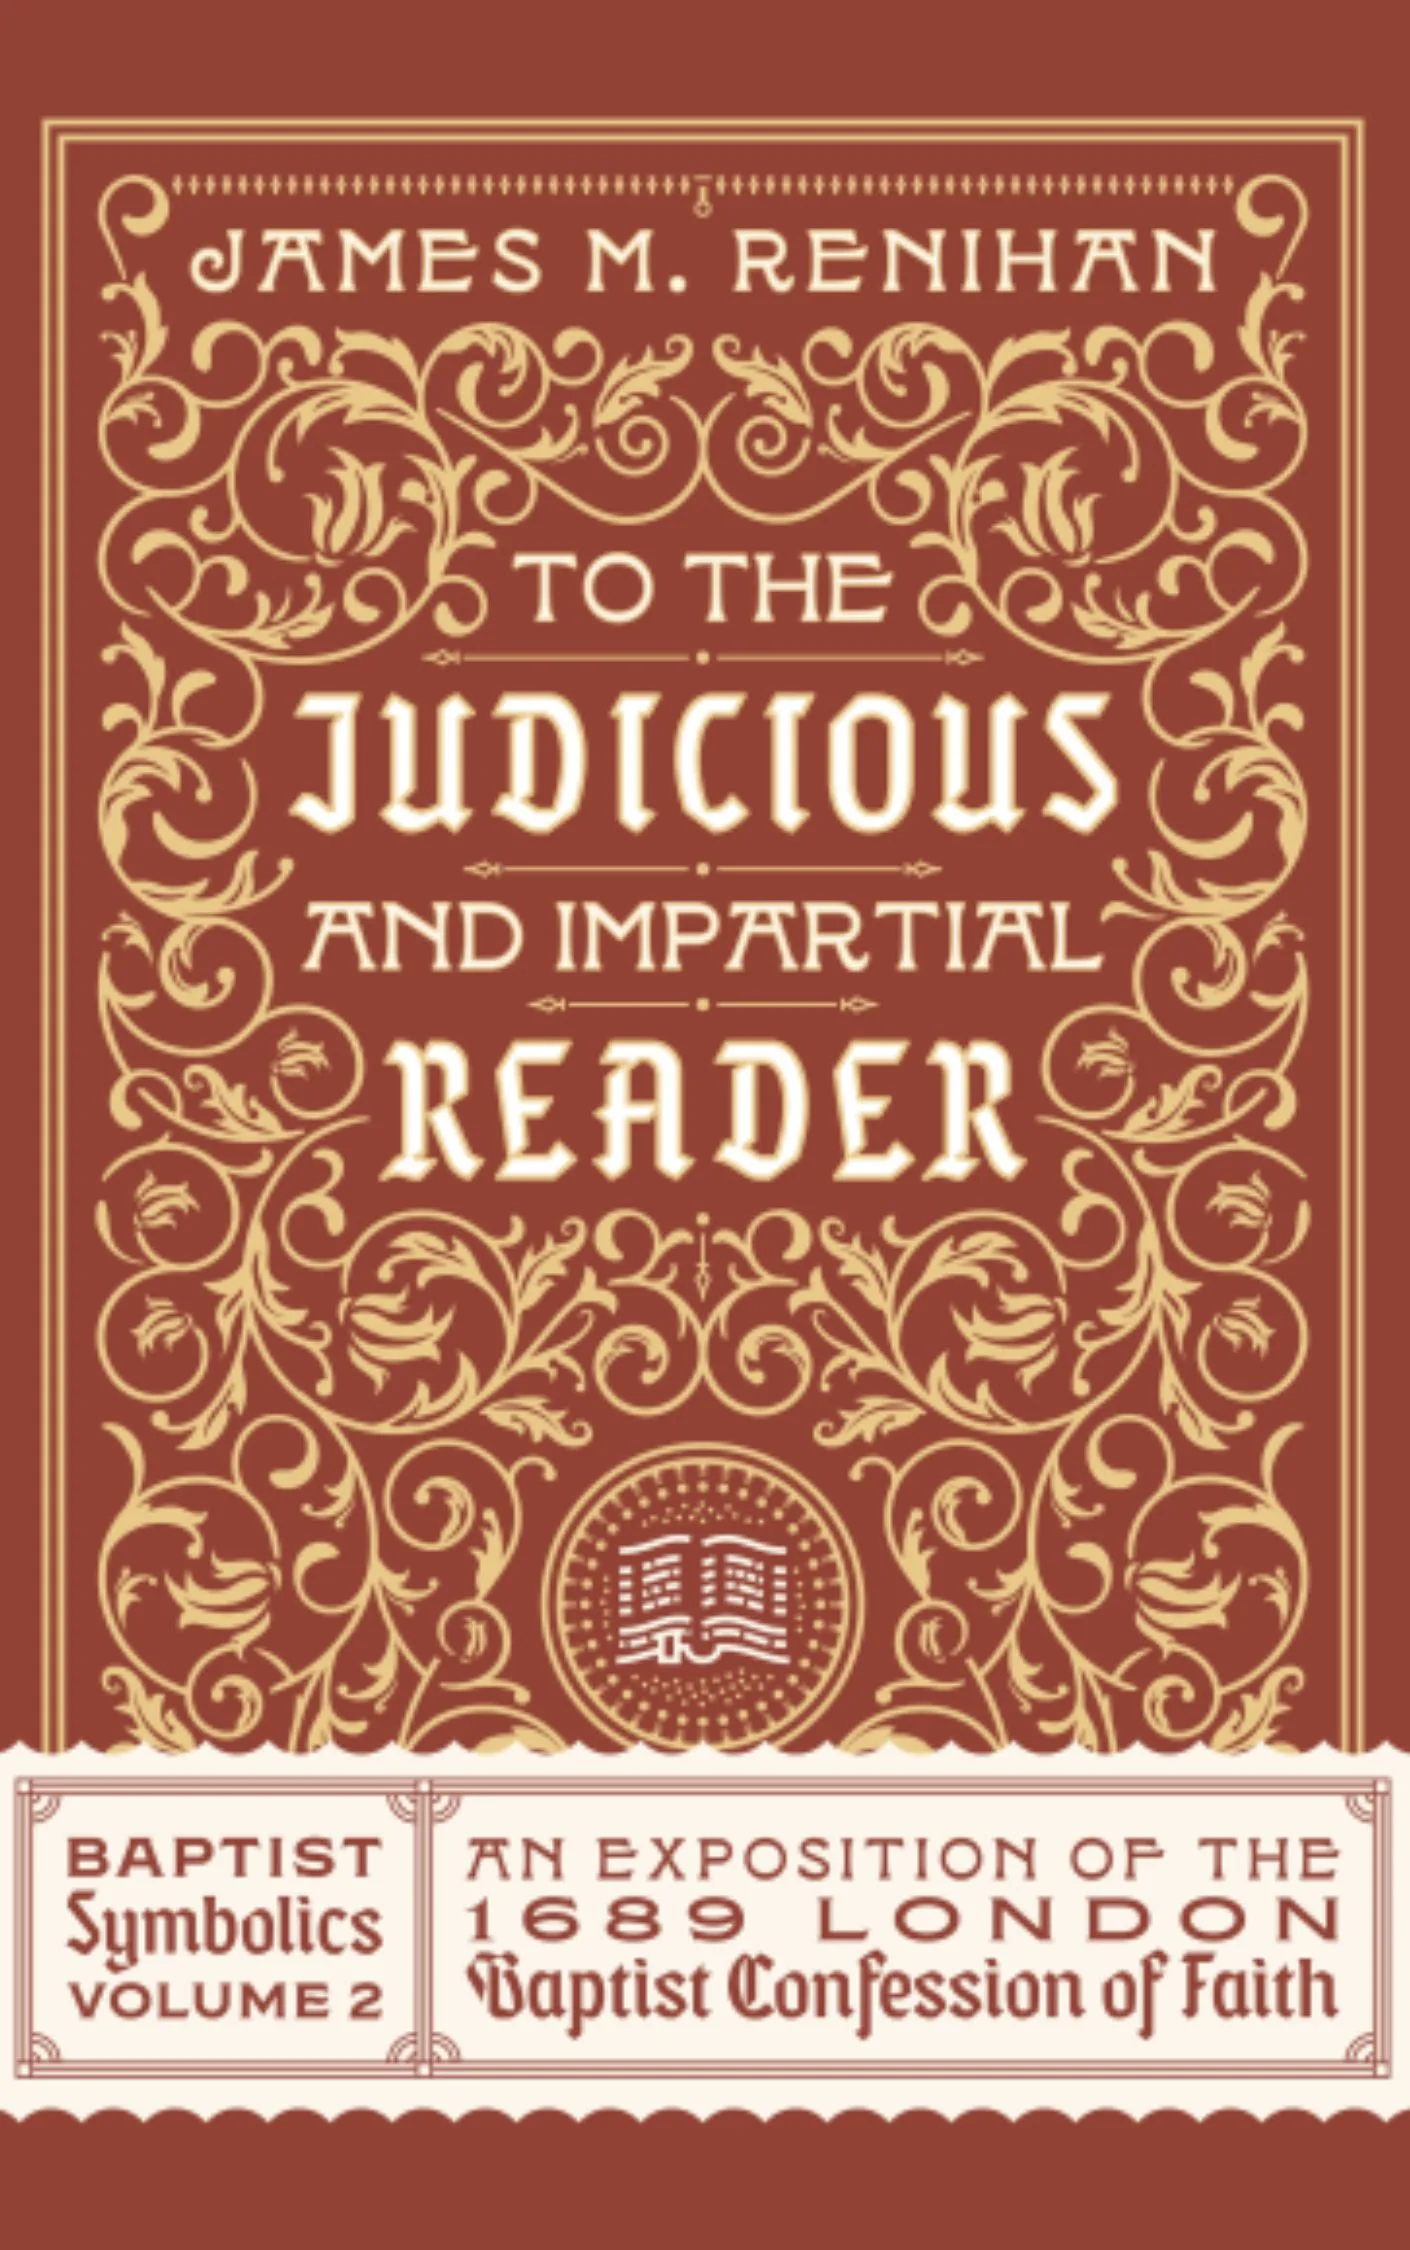 To the Judicious and Impartial Reader: Baptist Symbolics Volume 2 by James Renihan